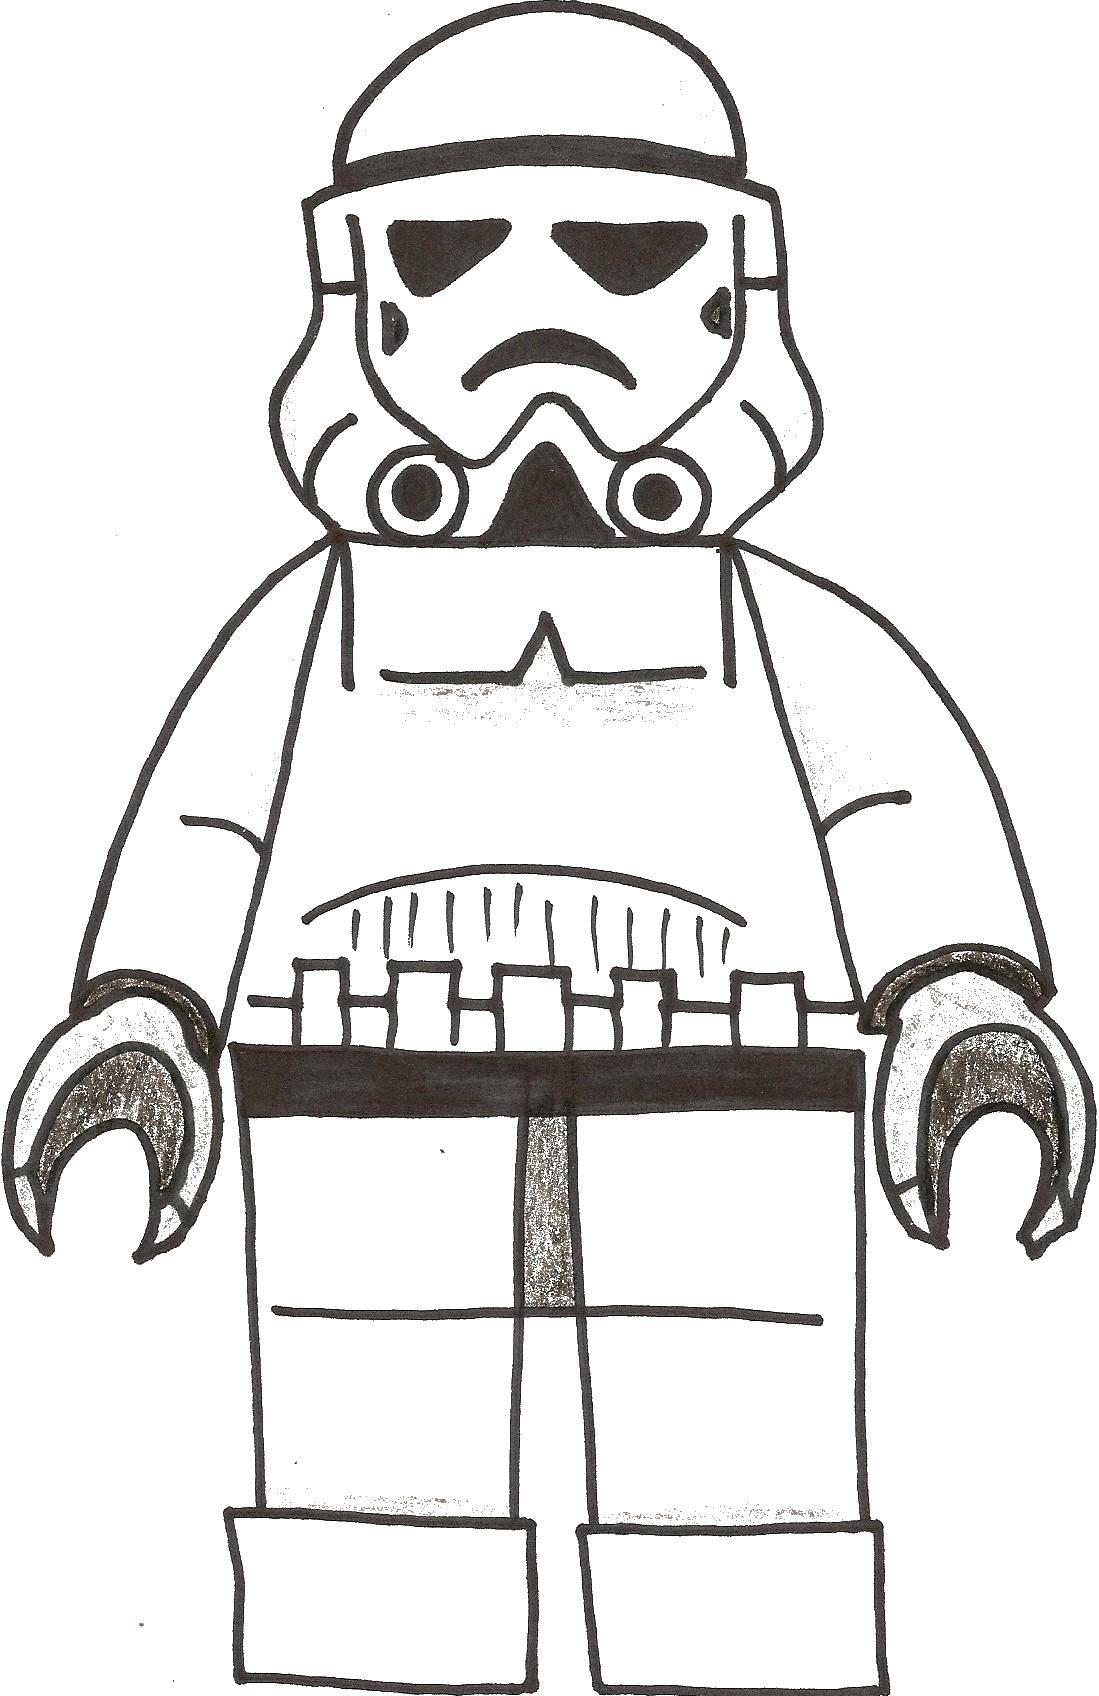 Coloring Picture of LEGO Darth Vader. Category LEGO. Tags:  LEGO, Darth Vader, star wars.